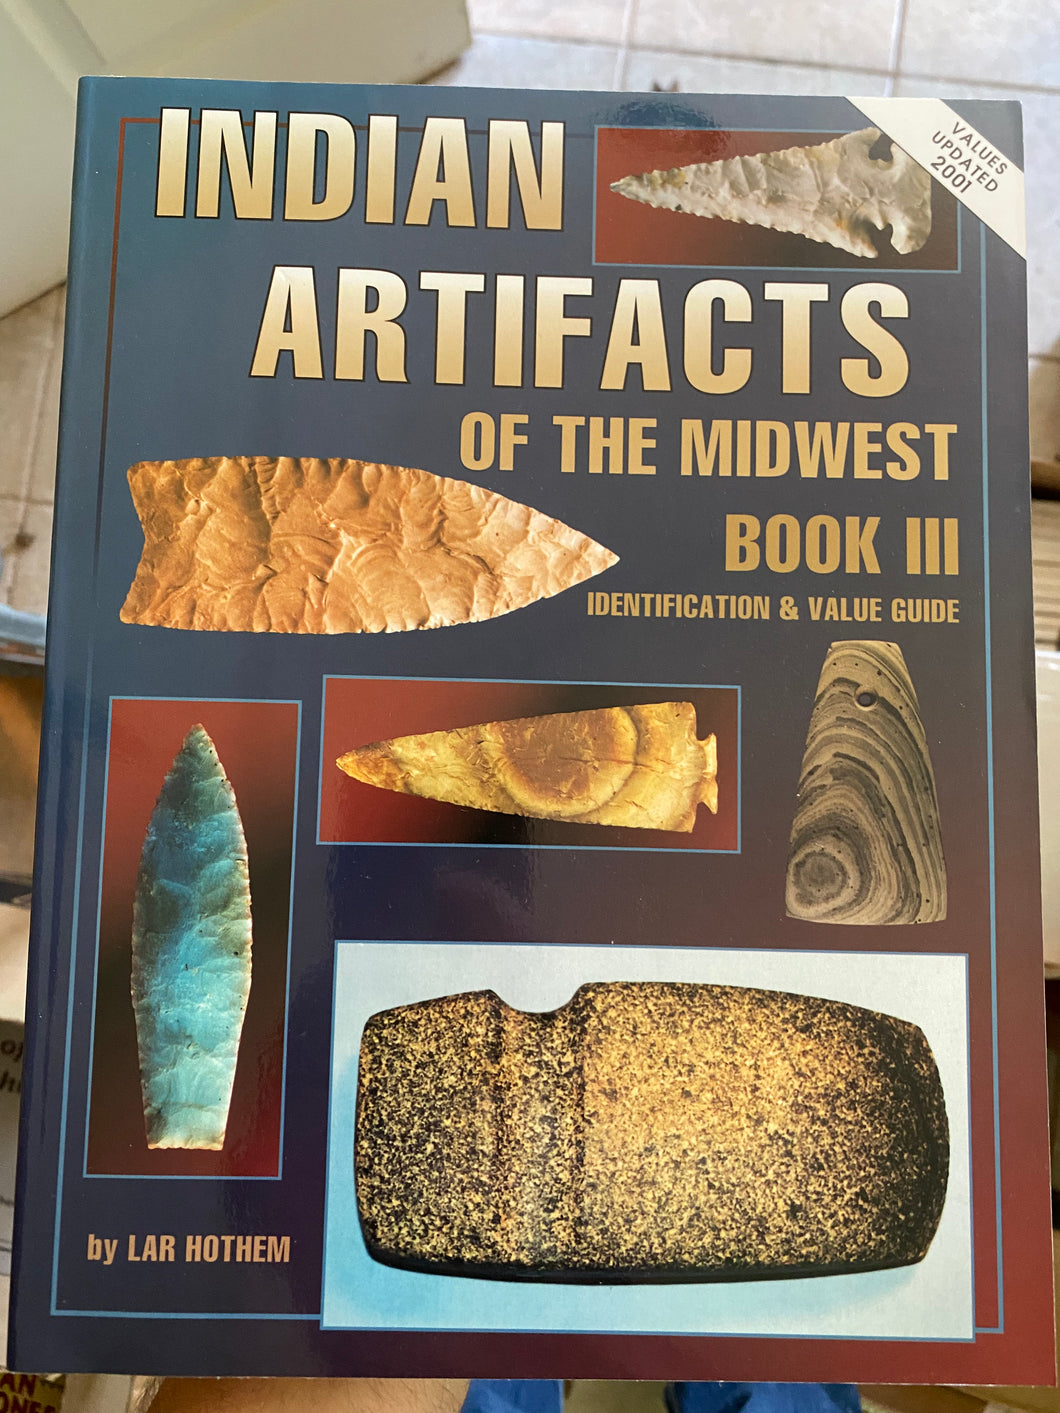 “Indian Artifacts of the Midwest 3” by Lar Hothem